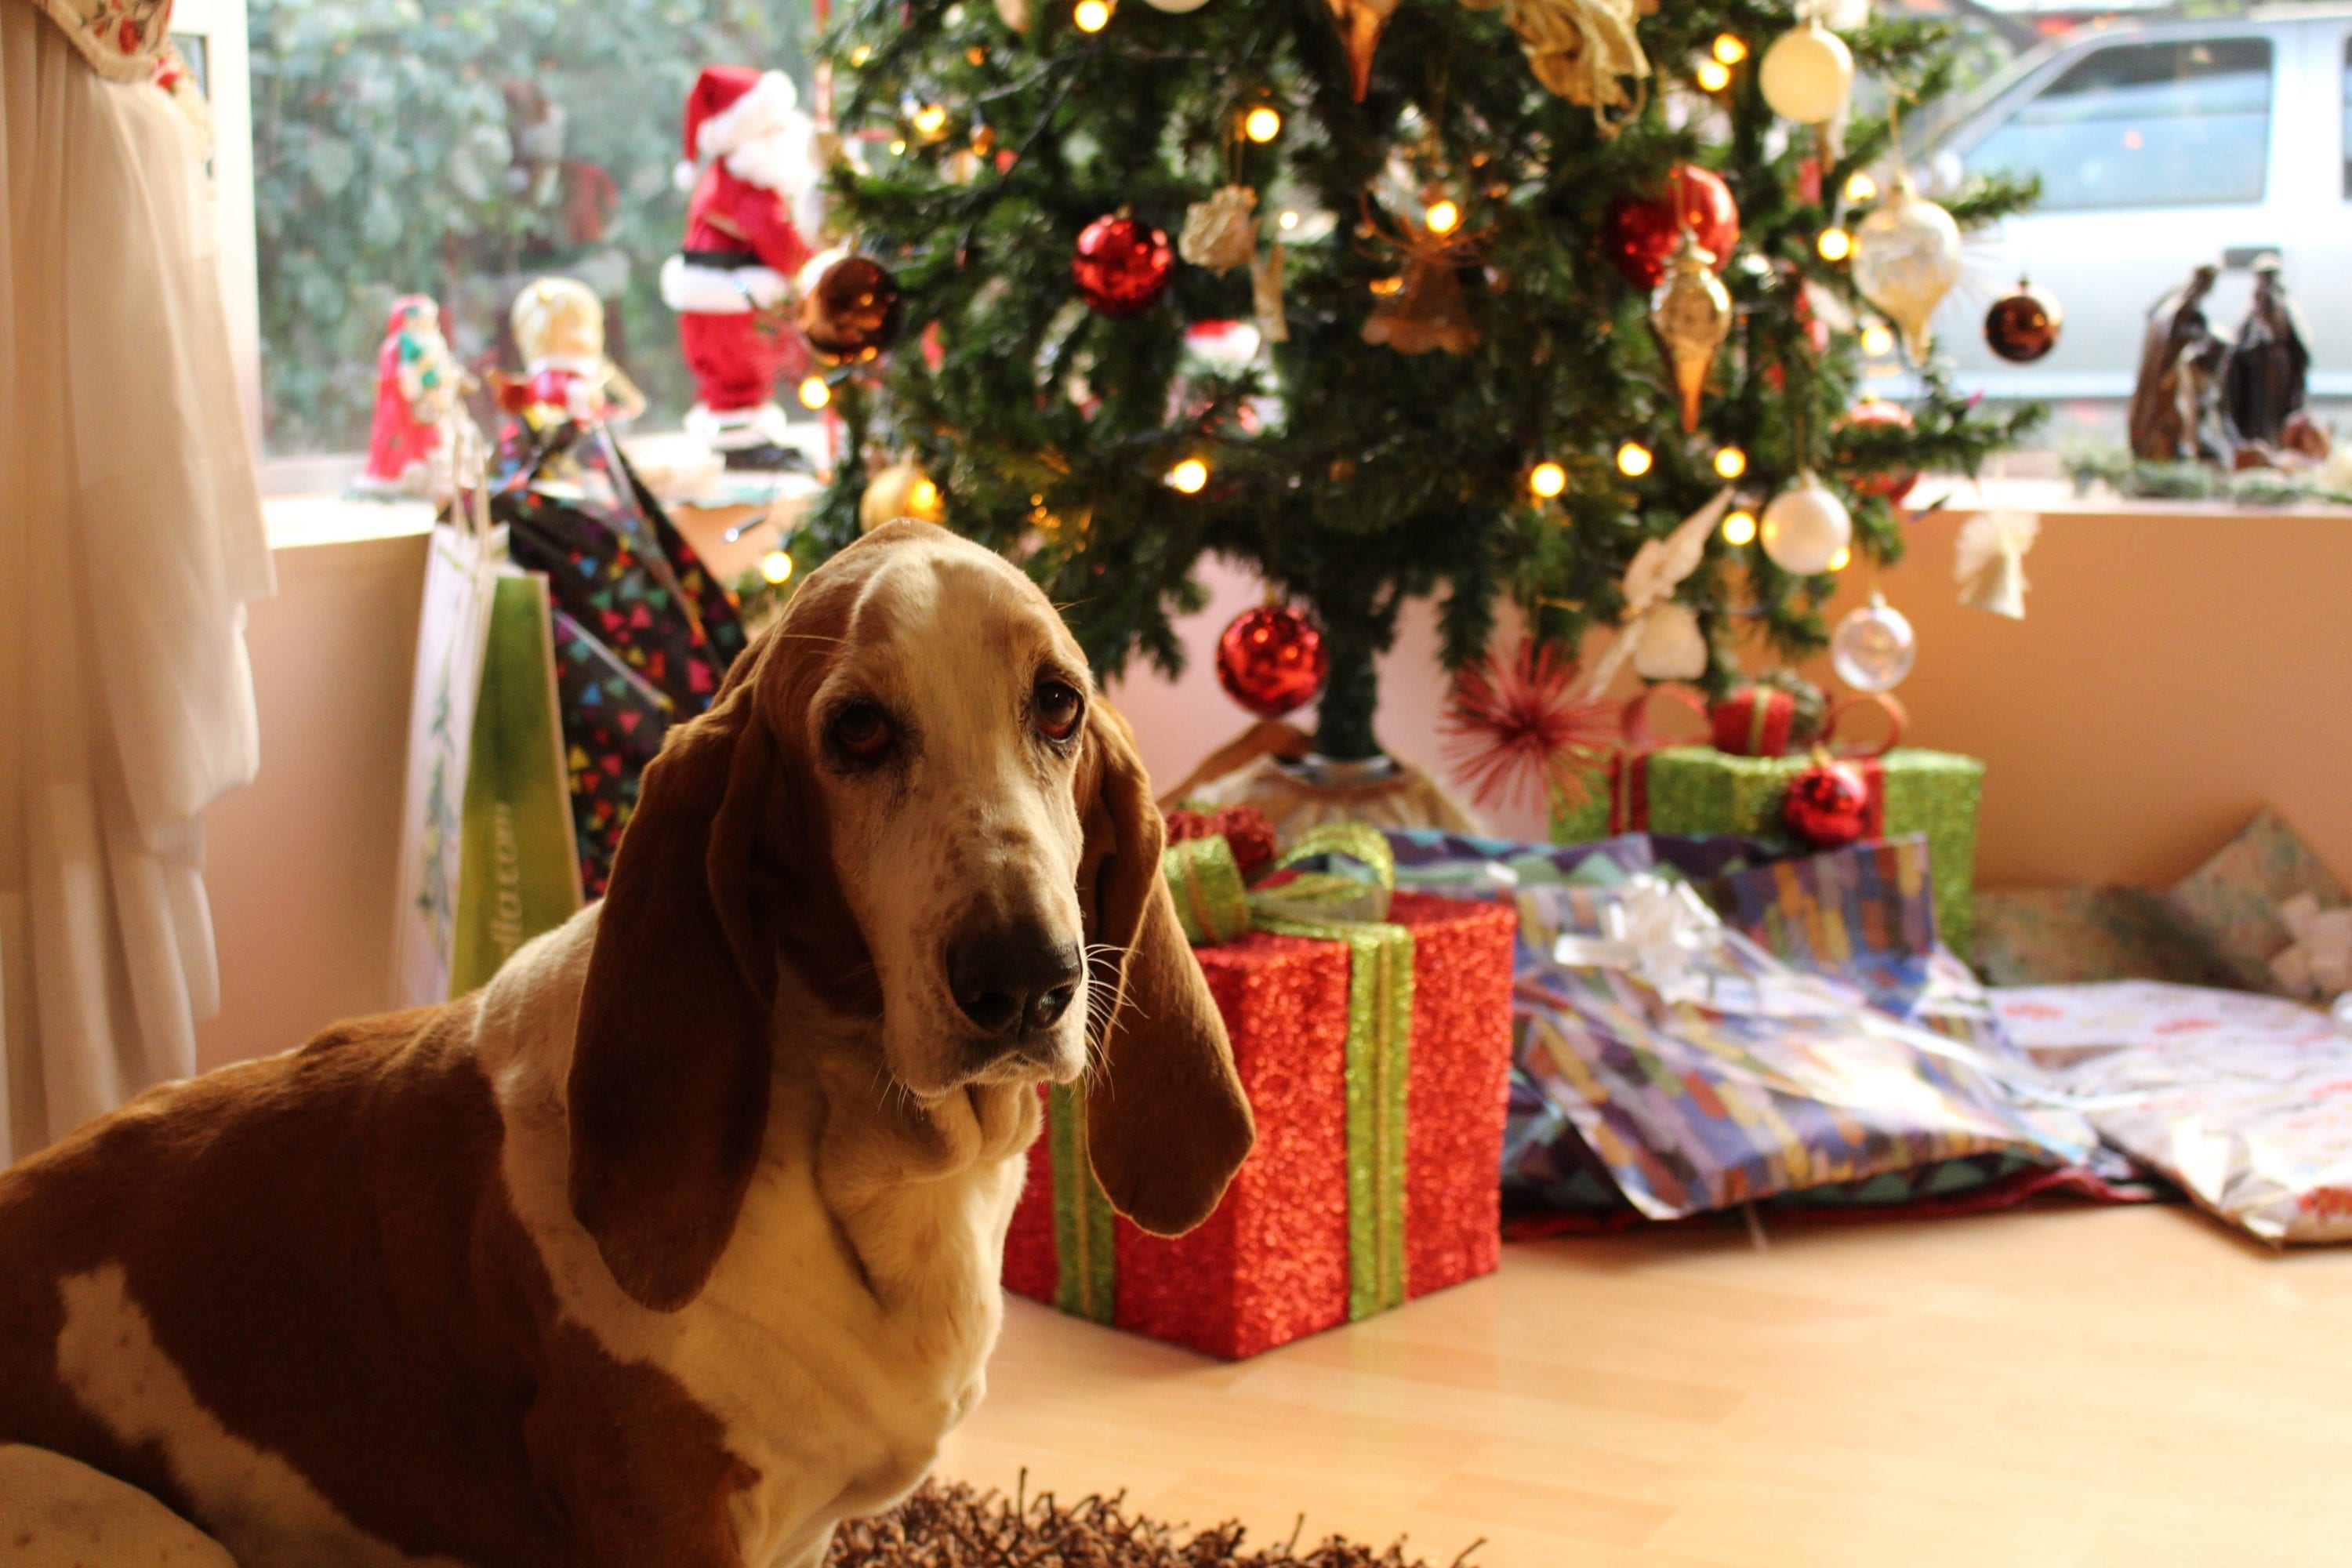 Sad hound dog in front of christmas tree